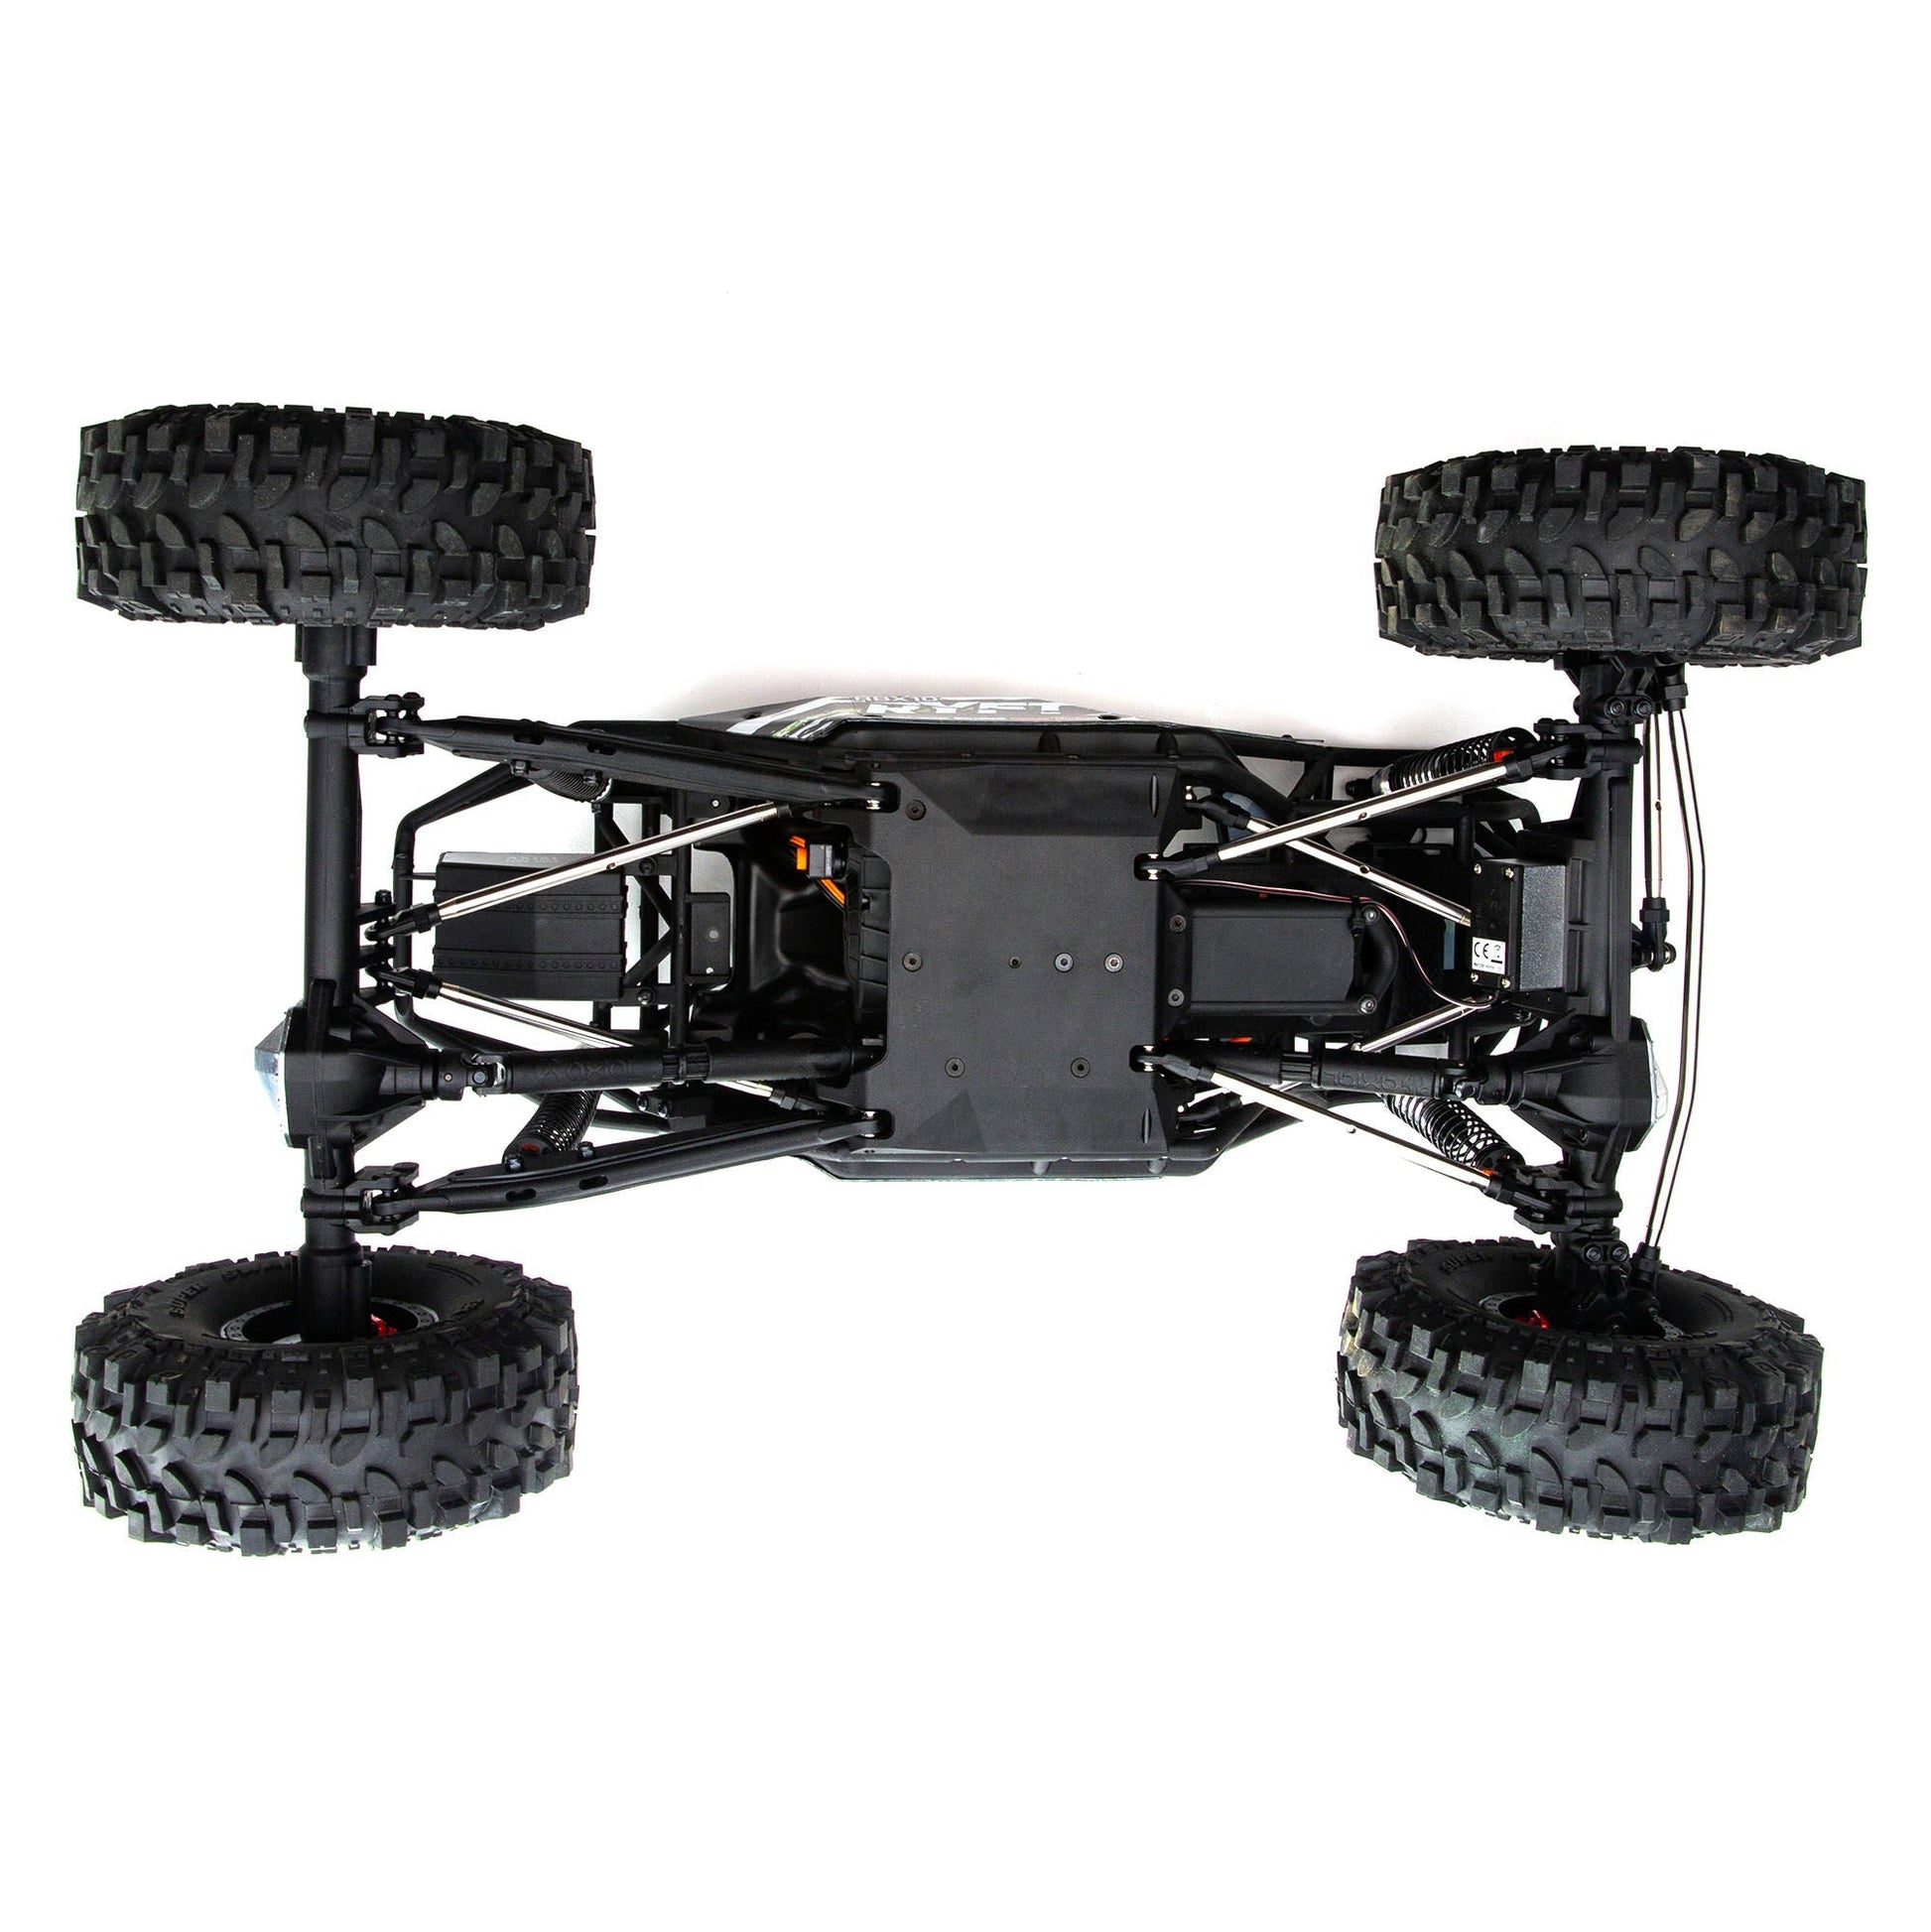 1/10 RBX10 Ryft 4WD Brushless Rock Bouncer RTR Black - Dirt Cheap RC SAVING YOU MONEY, ONE PART AT A TIME